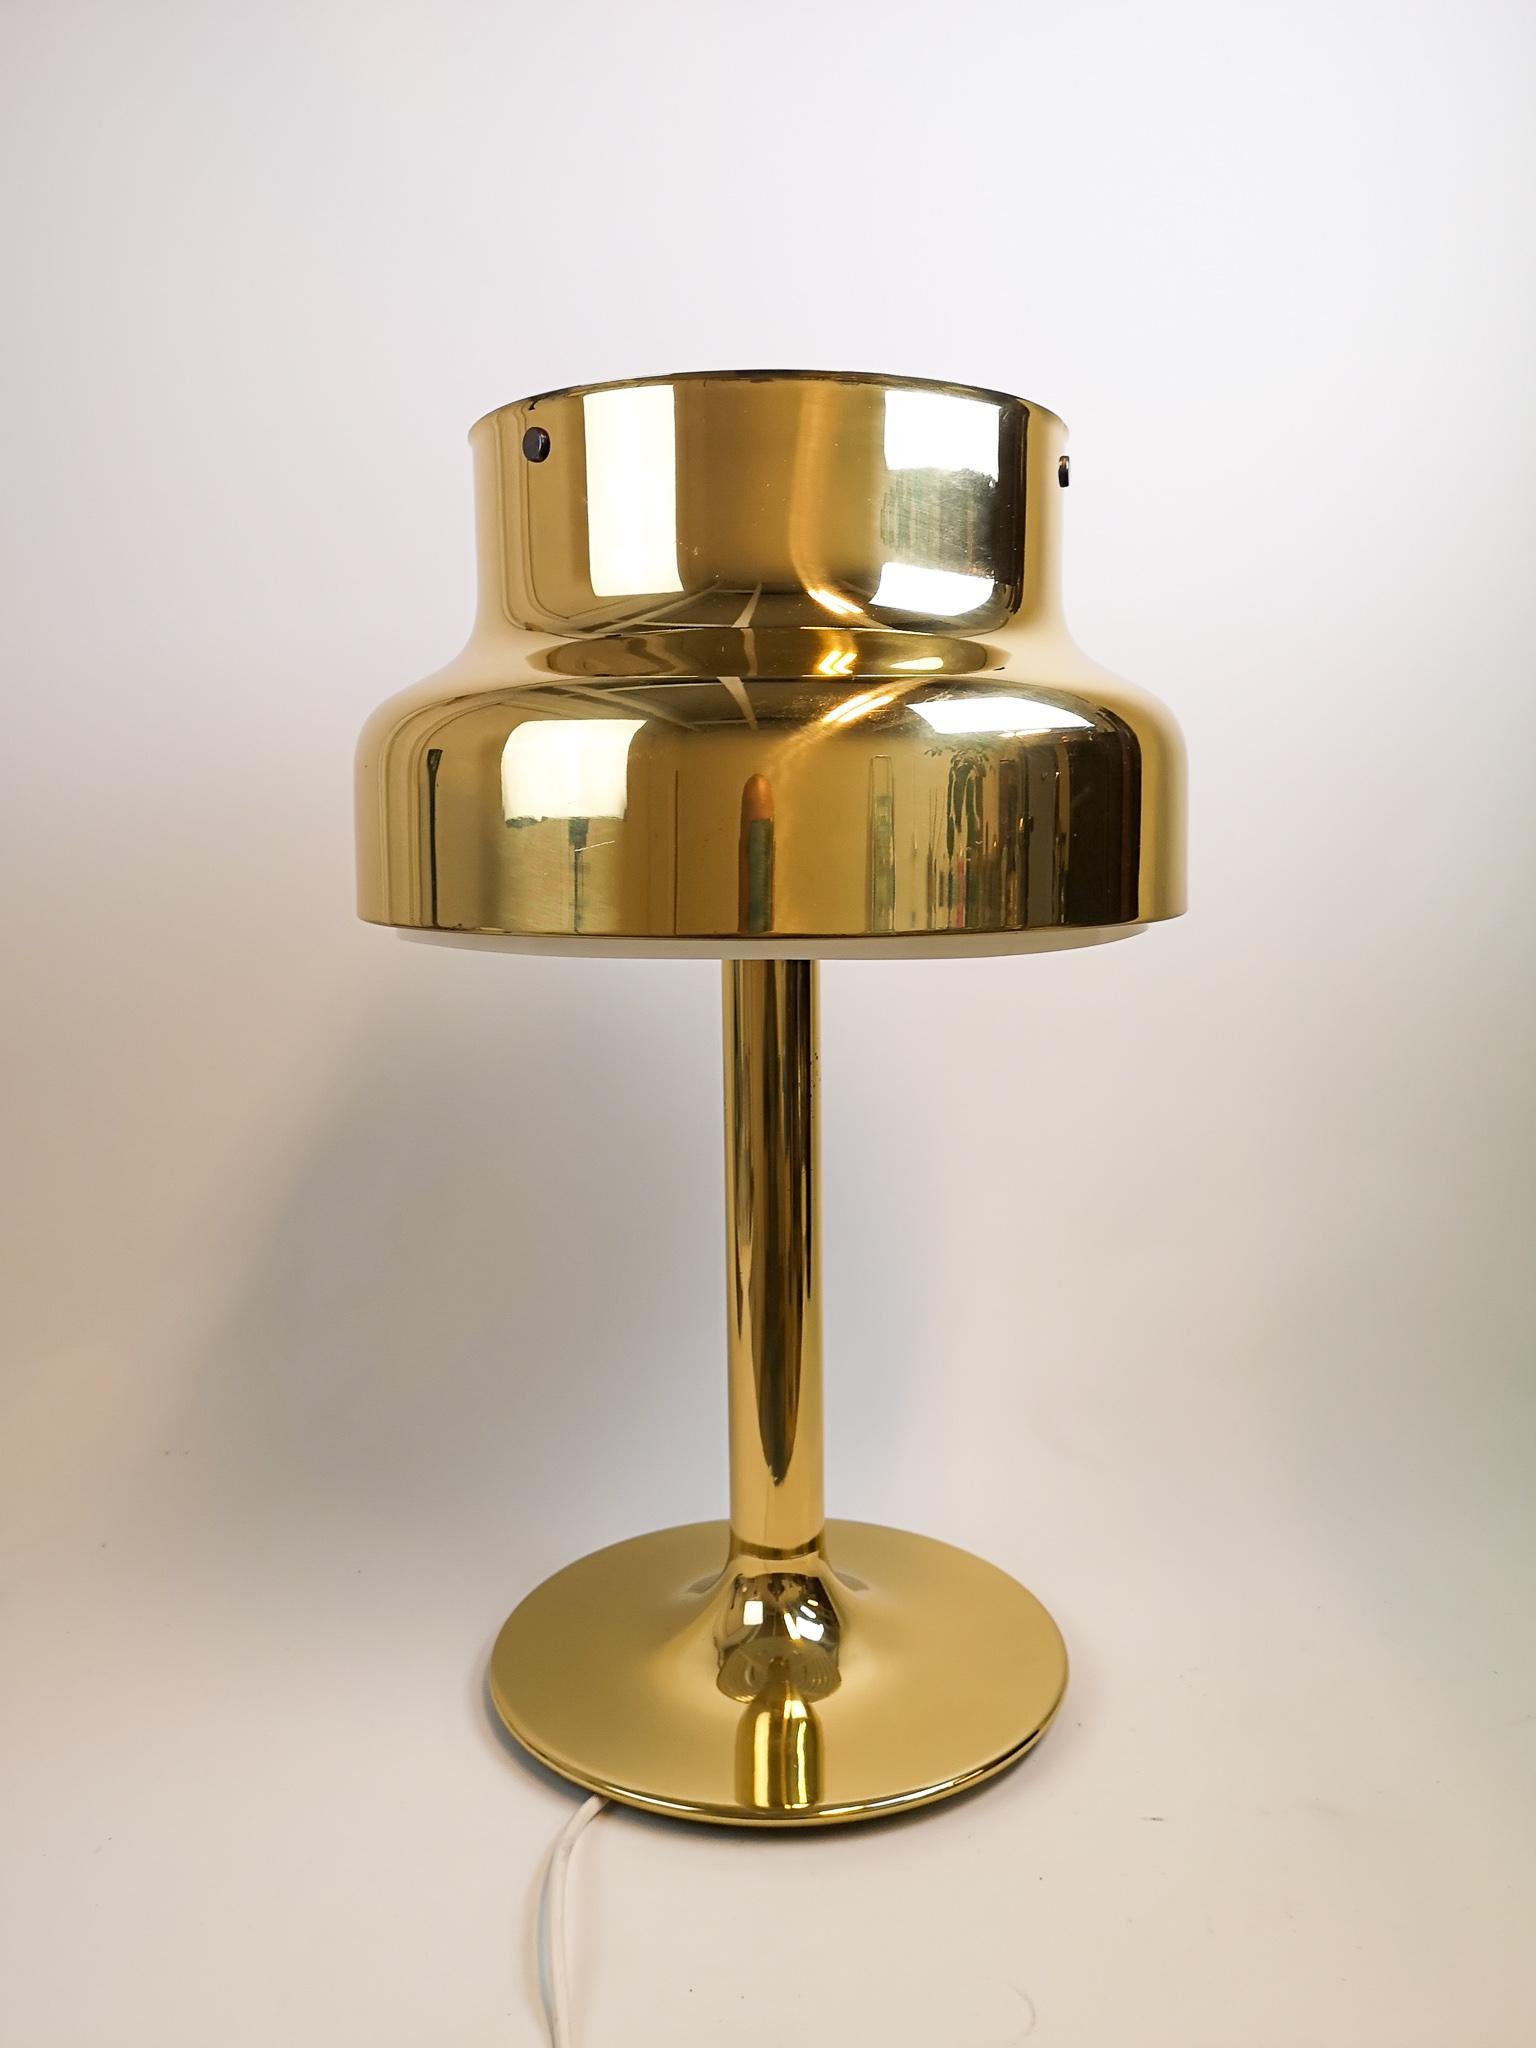 This 1960s table lamp, model Bumling, was designed by Anders Pehrson for Ateljé Lyktan in Åhus, Sweden. This table lamp with its brass featuers is a nice edition to your writing desk or table. 

Nice working vintage condition.

Measures: H 62